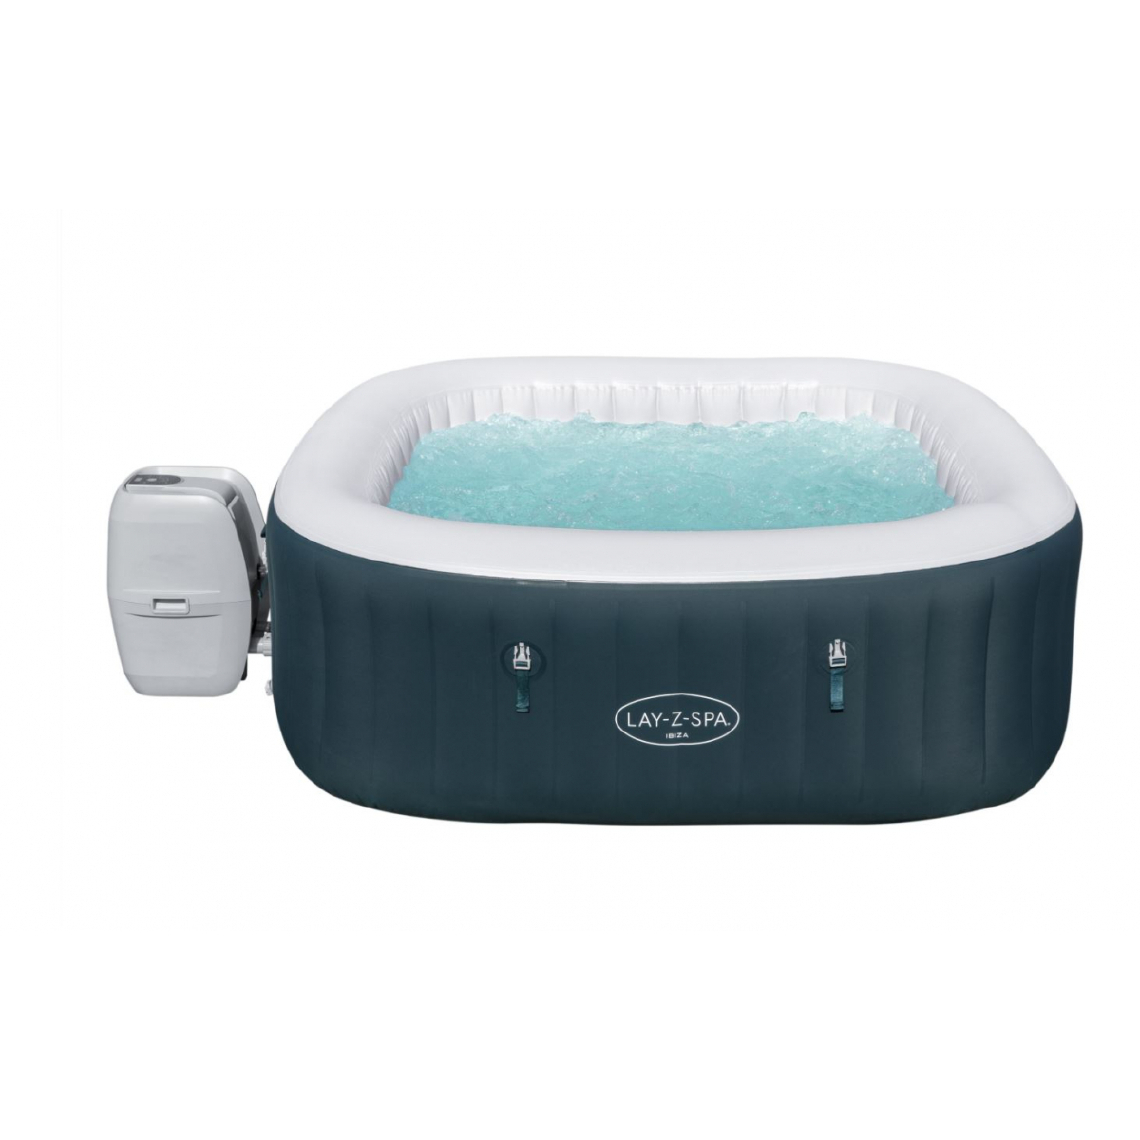 Bestway - Spa gonflable Lay-Z Ibiza AirJet 6 places Bestway square 60015 180x66cm - Spa gonflable